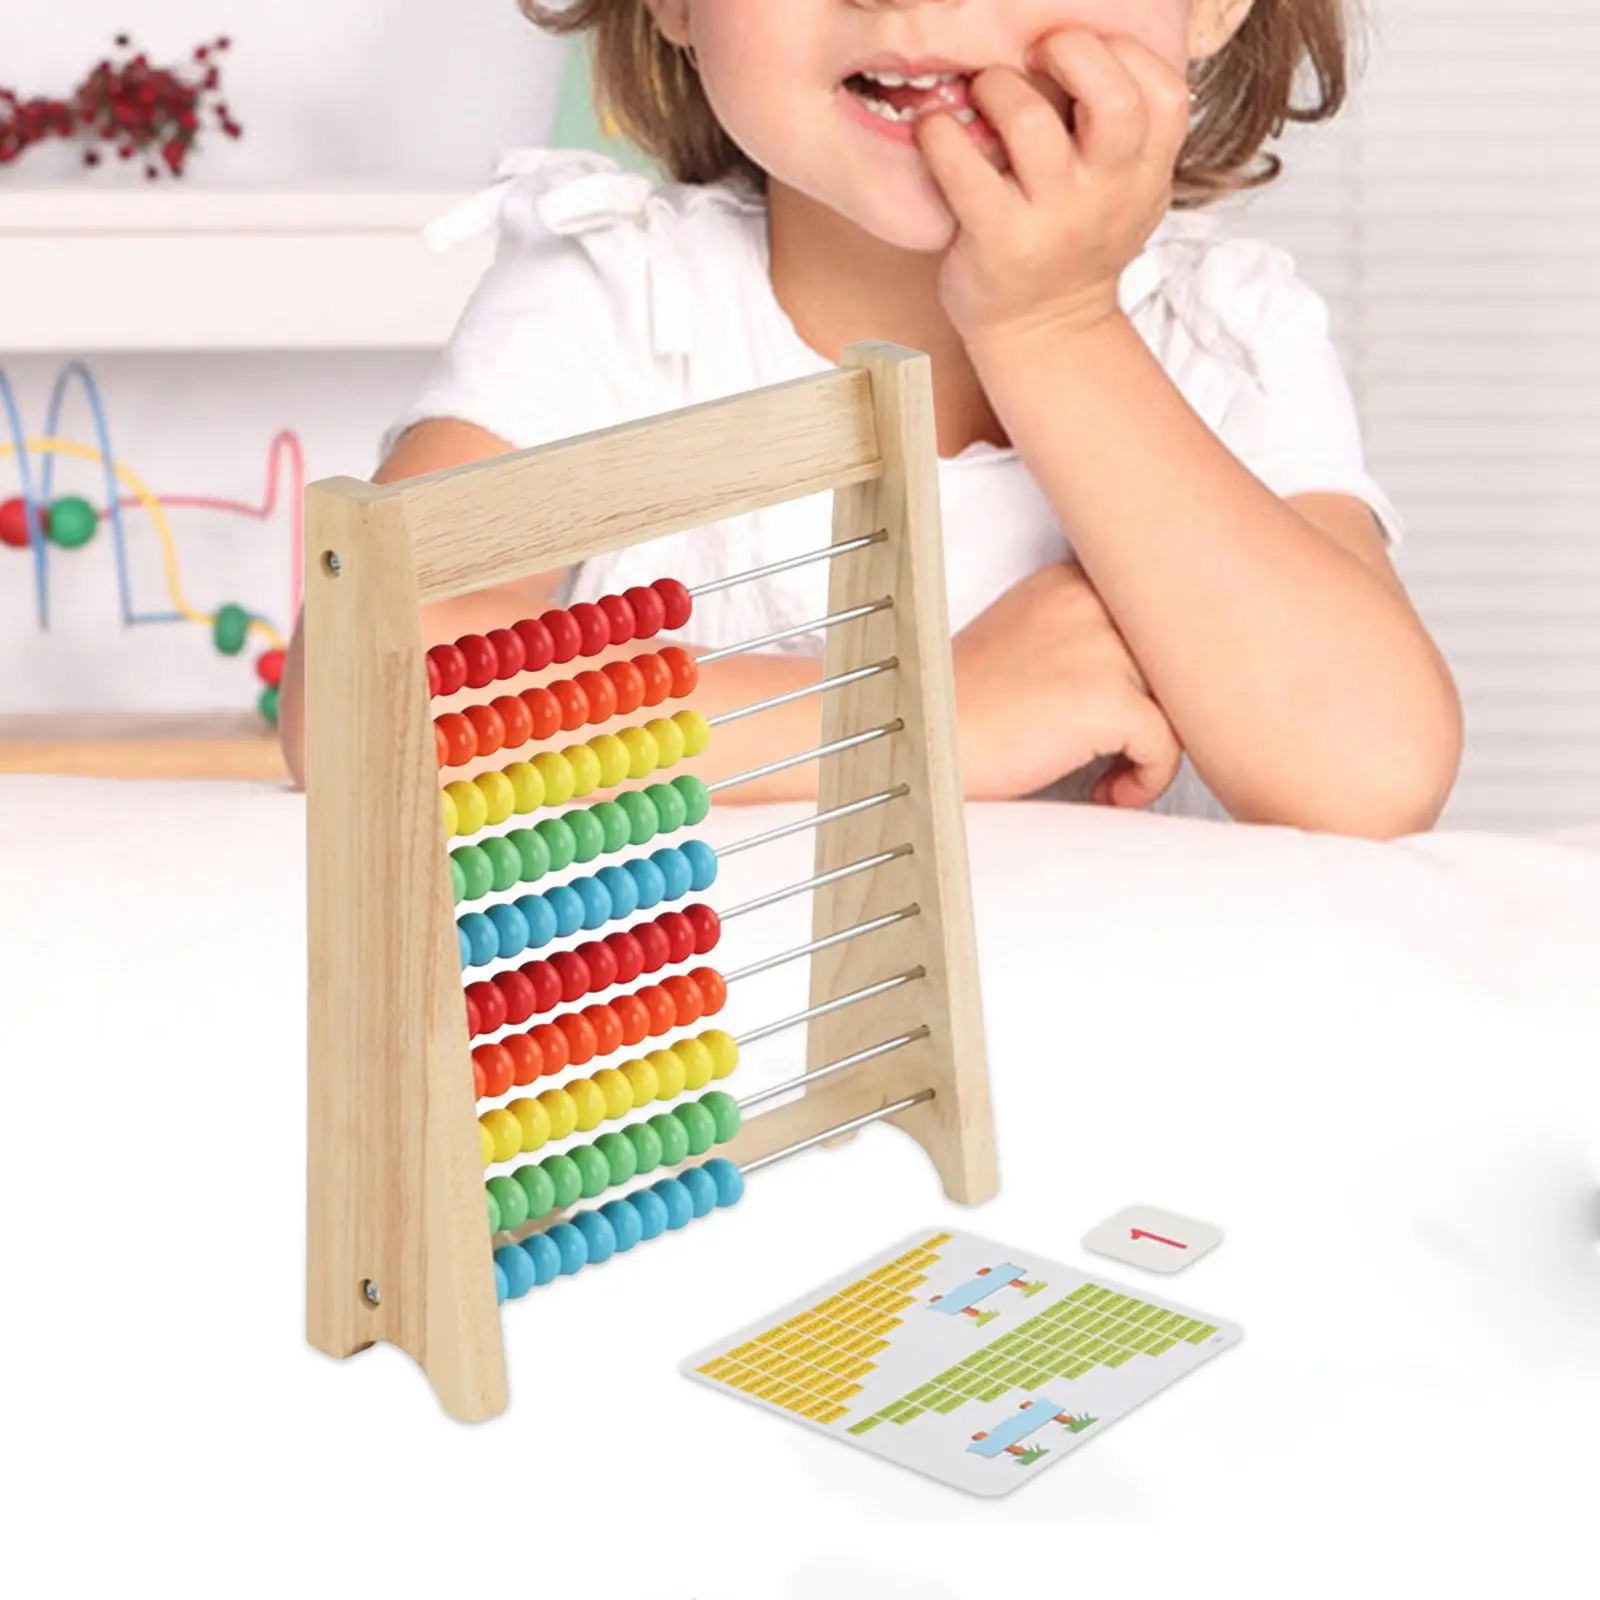 Learning Number Abacus Development Mathematics Toy Educational Counting Toy for Toddlers Children Kids Kindergarten Preschool